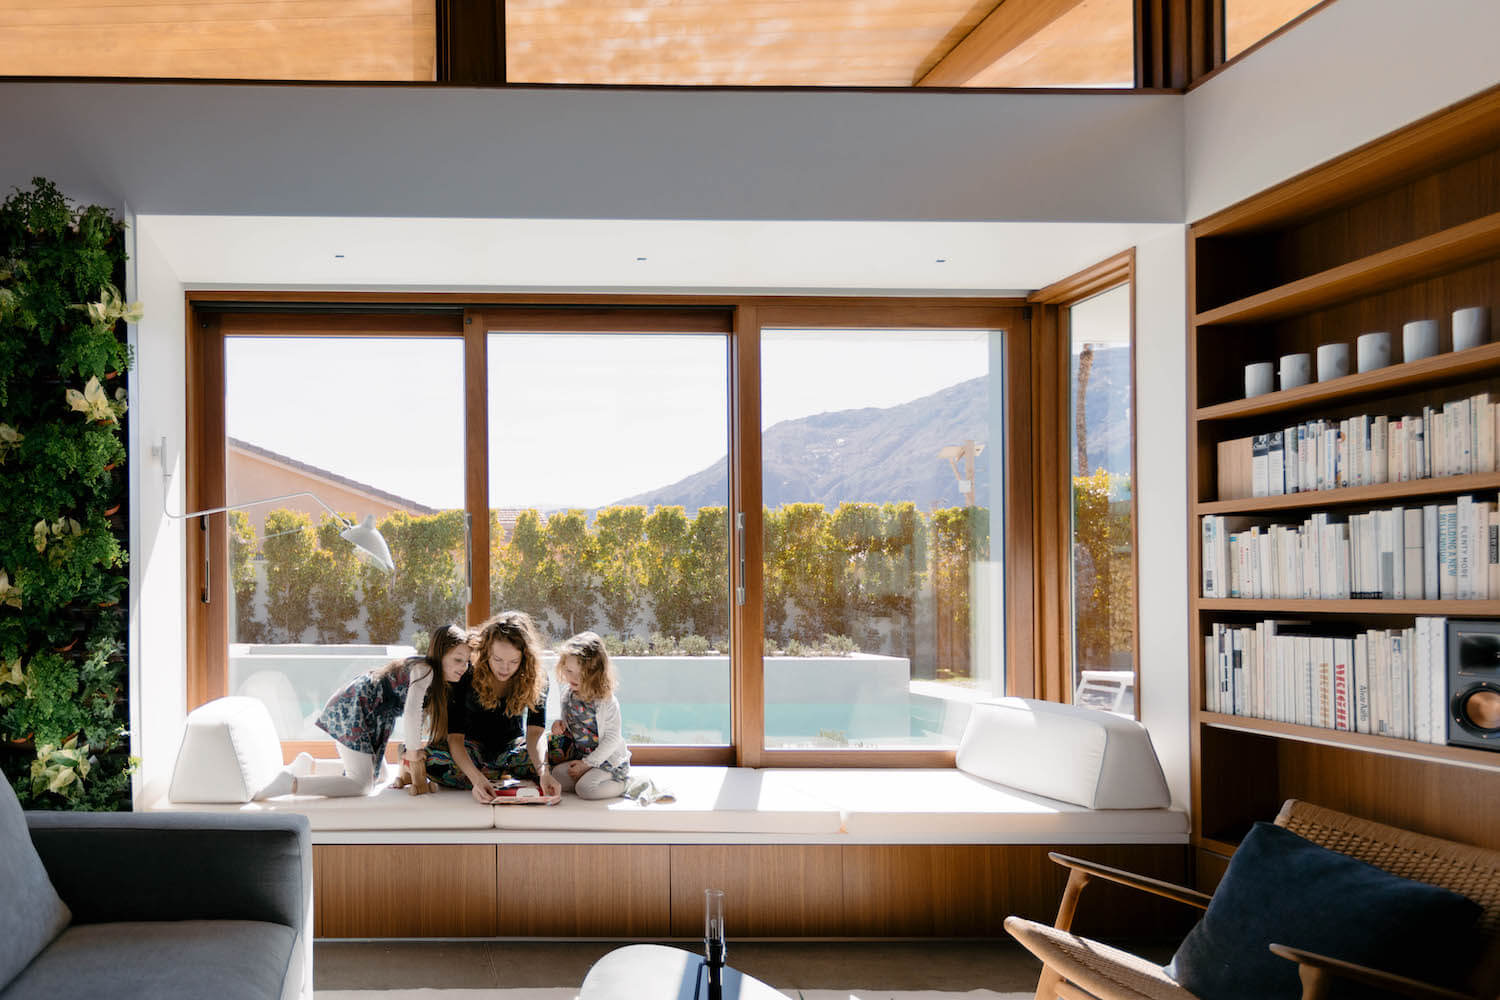 Meelena Turkel and her daughters on the window seat in Axiom Desert House.